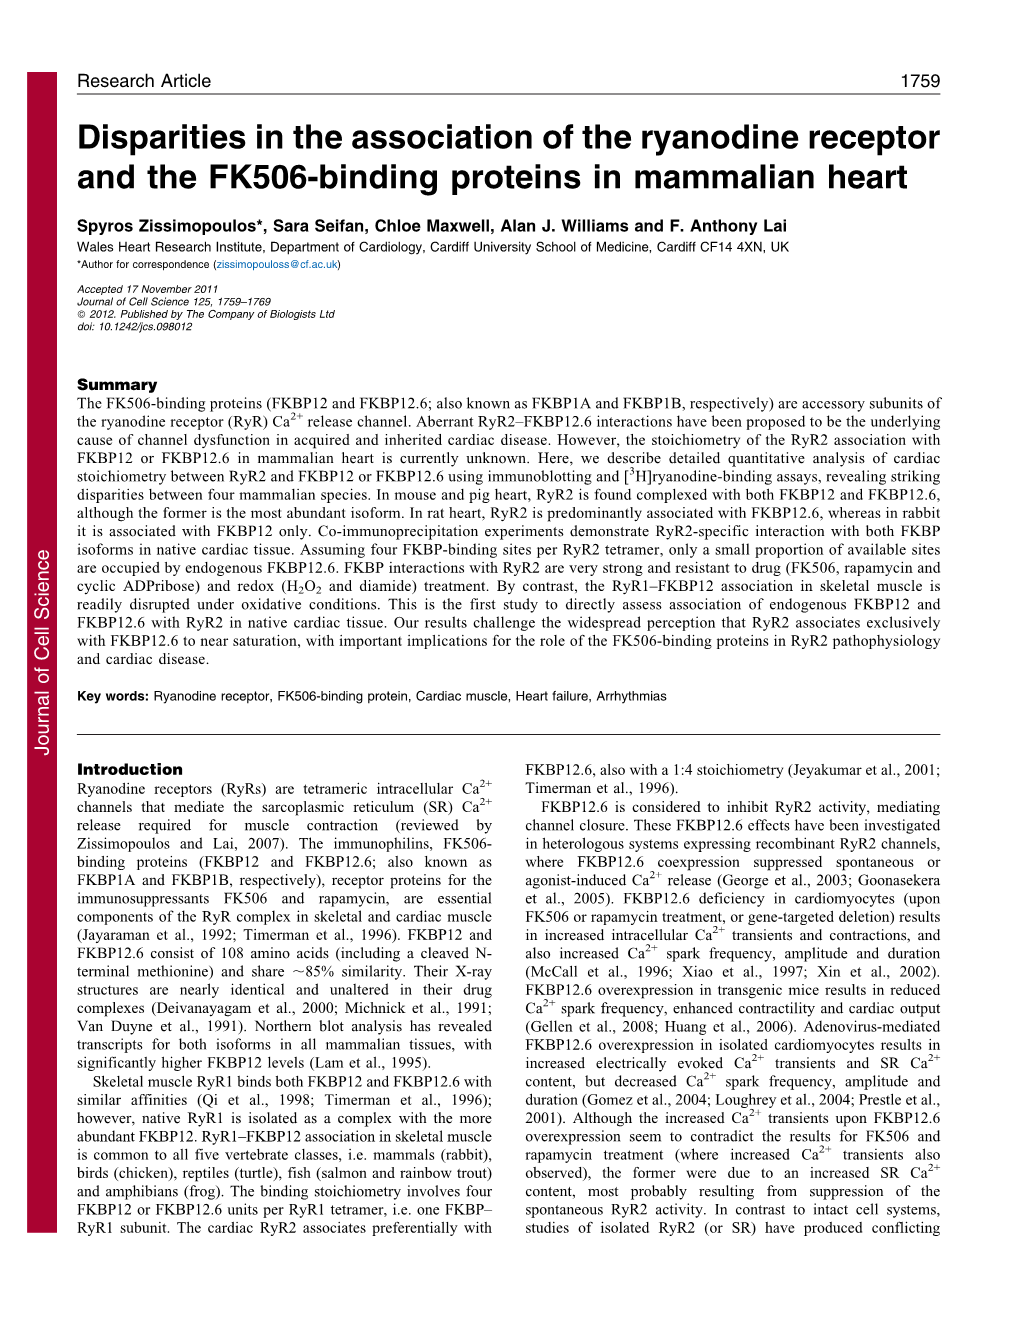 Disparities in the Association of the Ryanodine Receptor and the FK506-Binding Proteins in Mammalian Heart